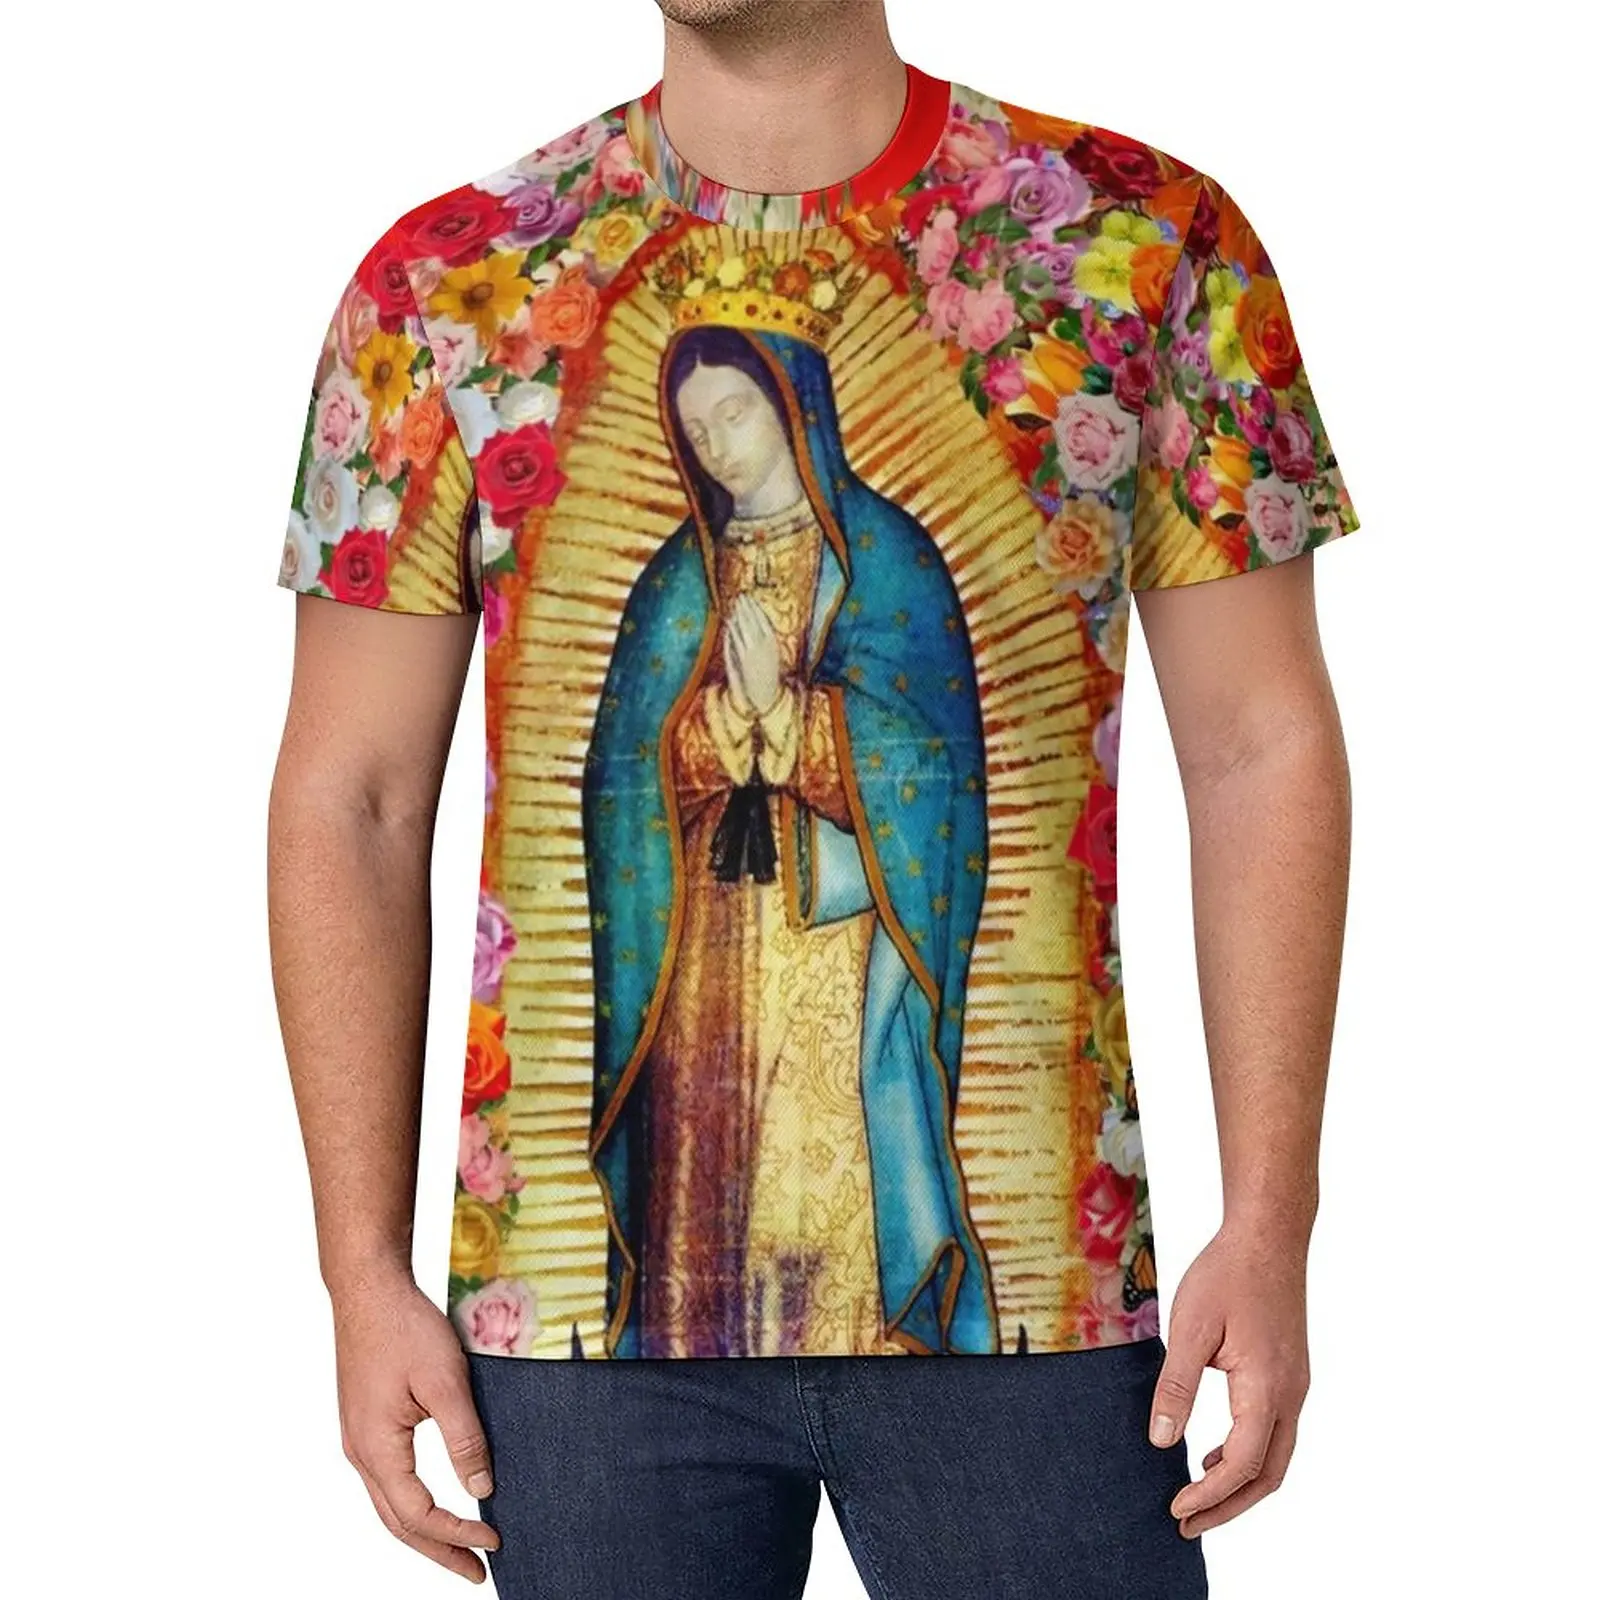 

Mexican Virgin Mary T-Shirt Our Lady of Guadalupe Fashion T-Shirts Classic Tshirt Summer Short Sleeve Printed Clothes